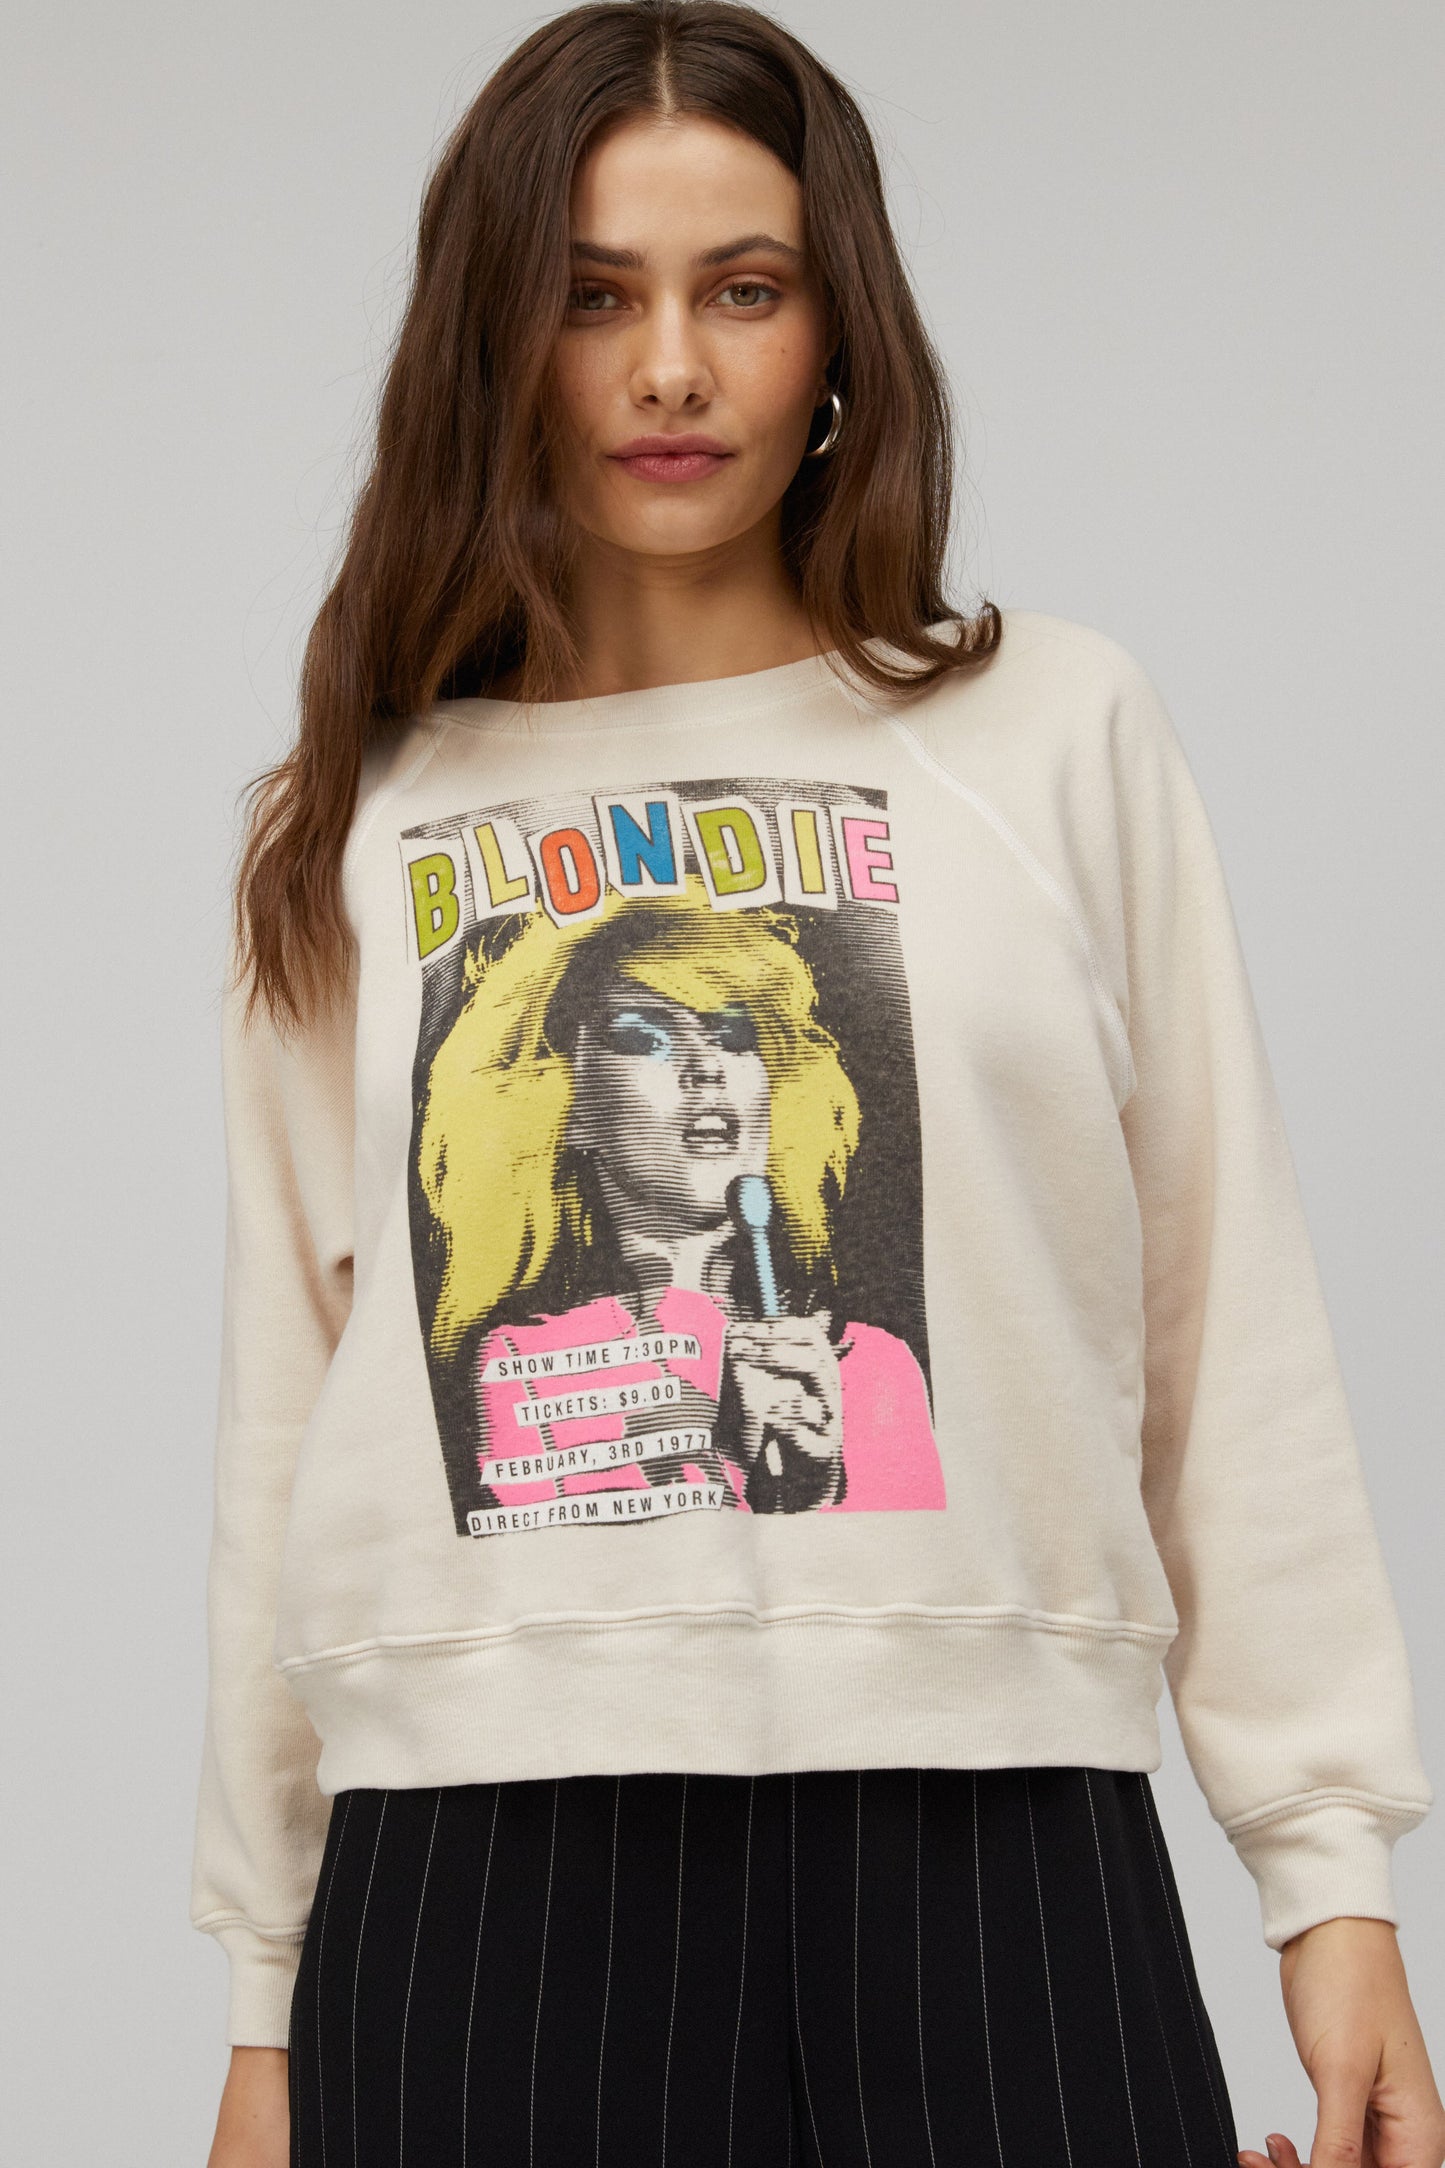 Brown-haired model featuring a dirty white crew with a portrait of Debbie Harry, an artsy large font "BLONDIE" in different colors, and a schedule of the show at the bottom left